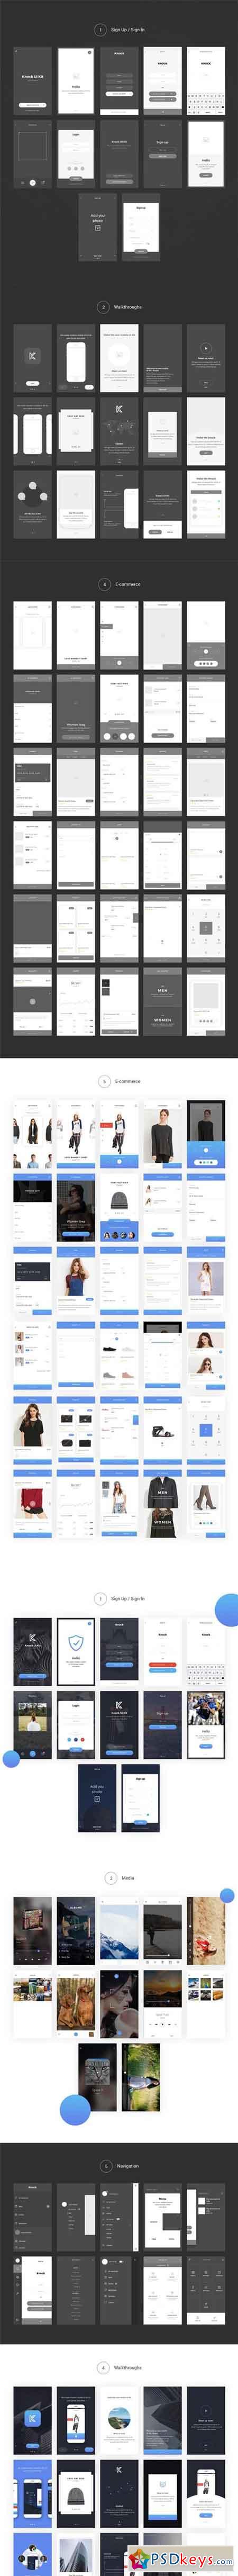 Knock Mobile UI Kit with Wireframe